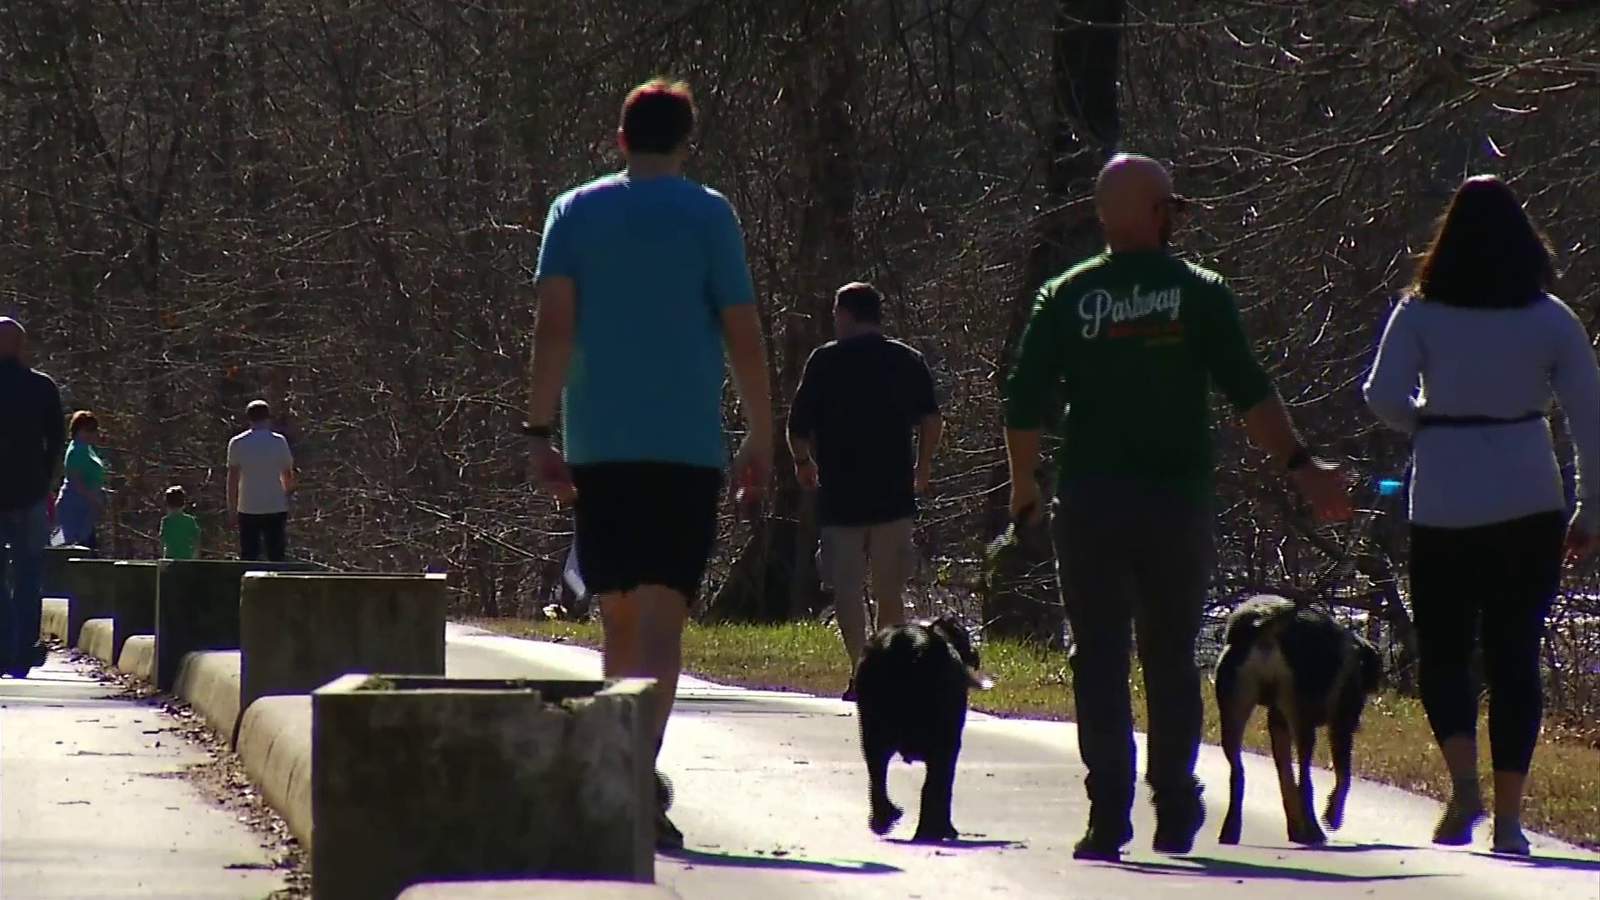 People enjoy Roanoke River Greenway during unusually warm January day